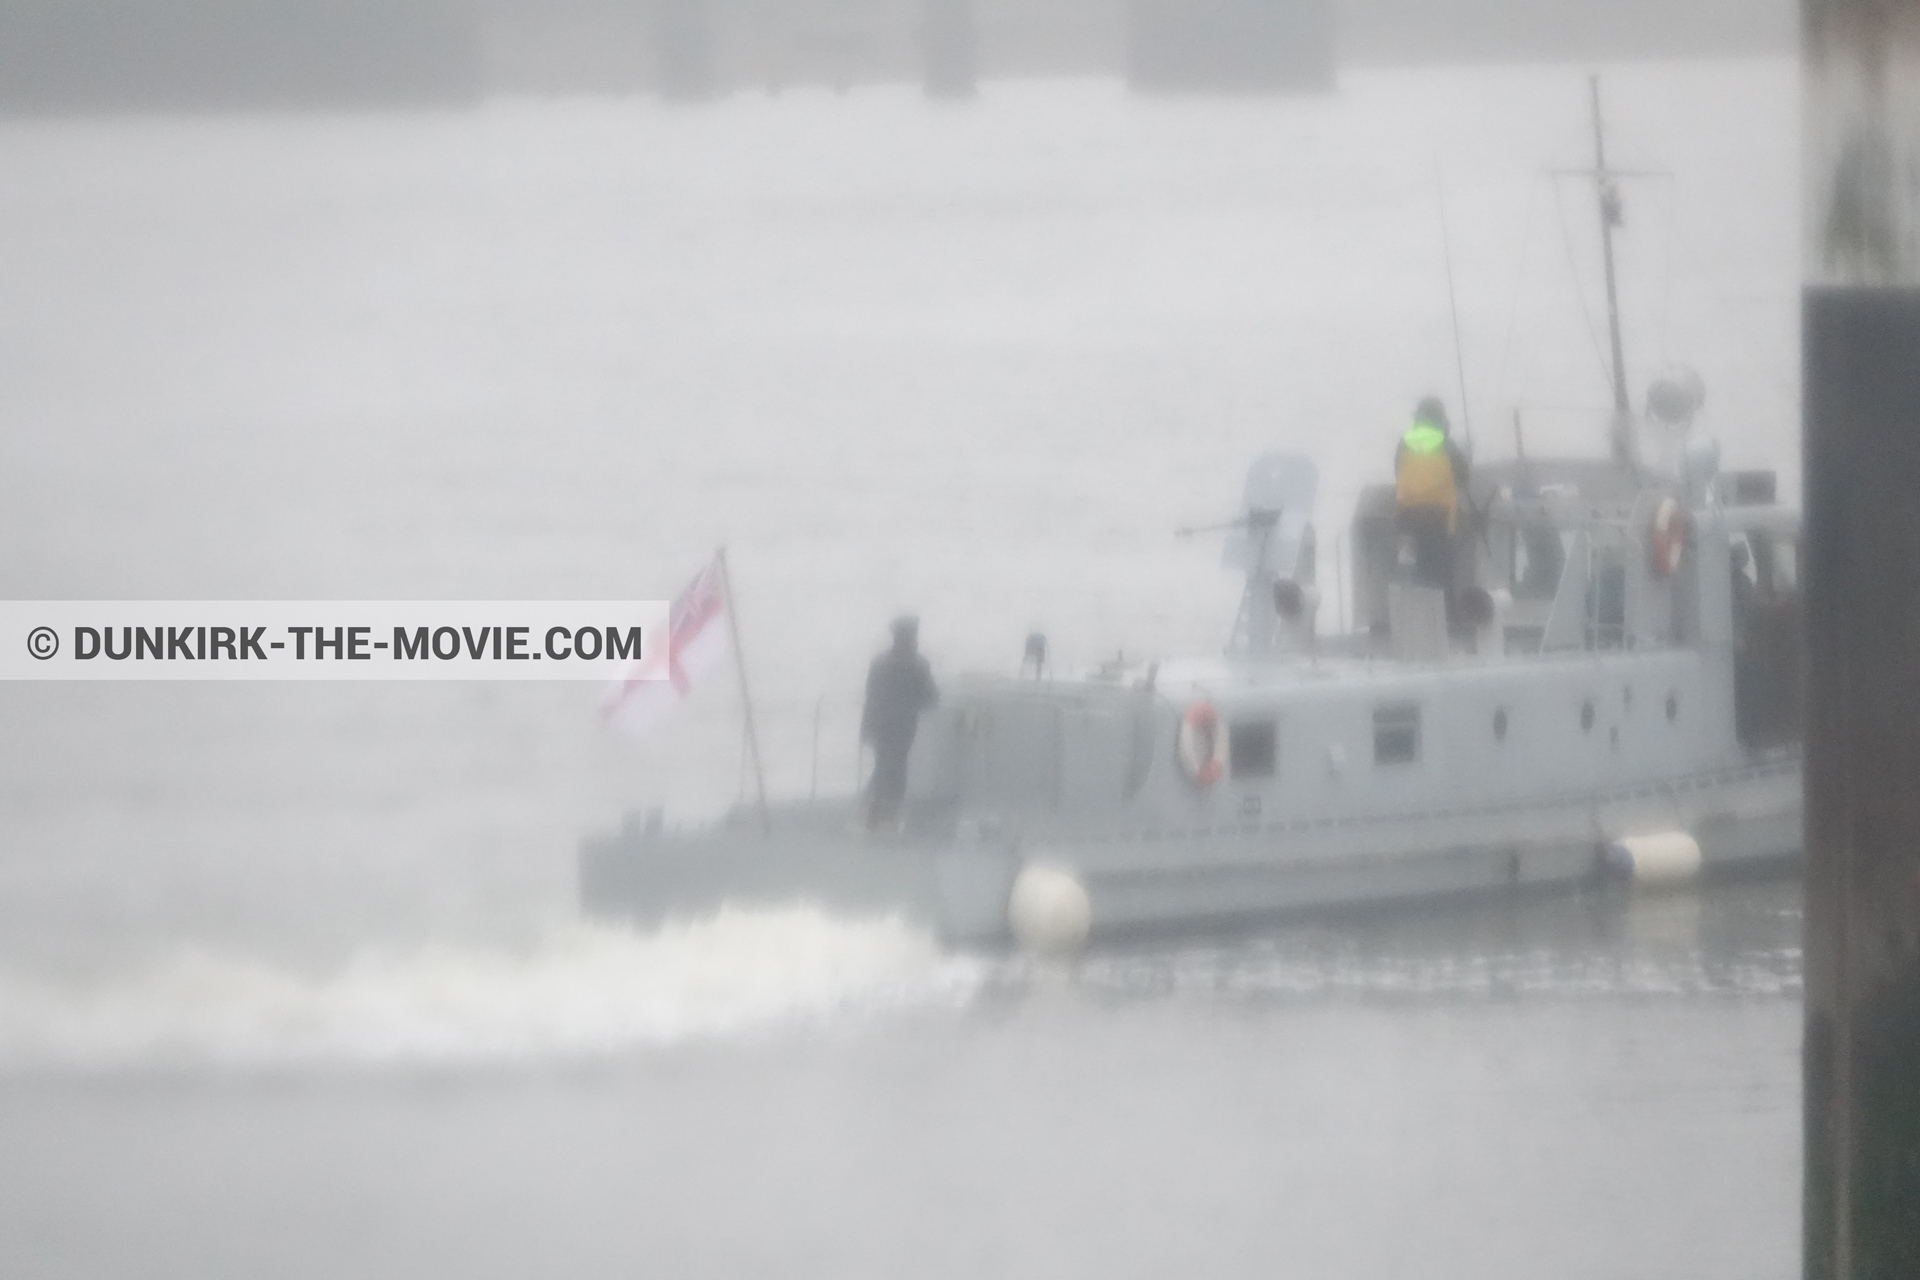 Picture with boat, grey sky, PR 22,  from behind the scene of the Dunkirk movie by Nolan